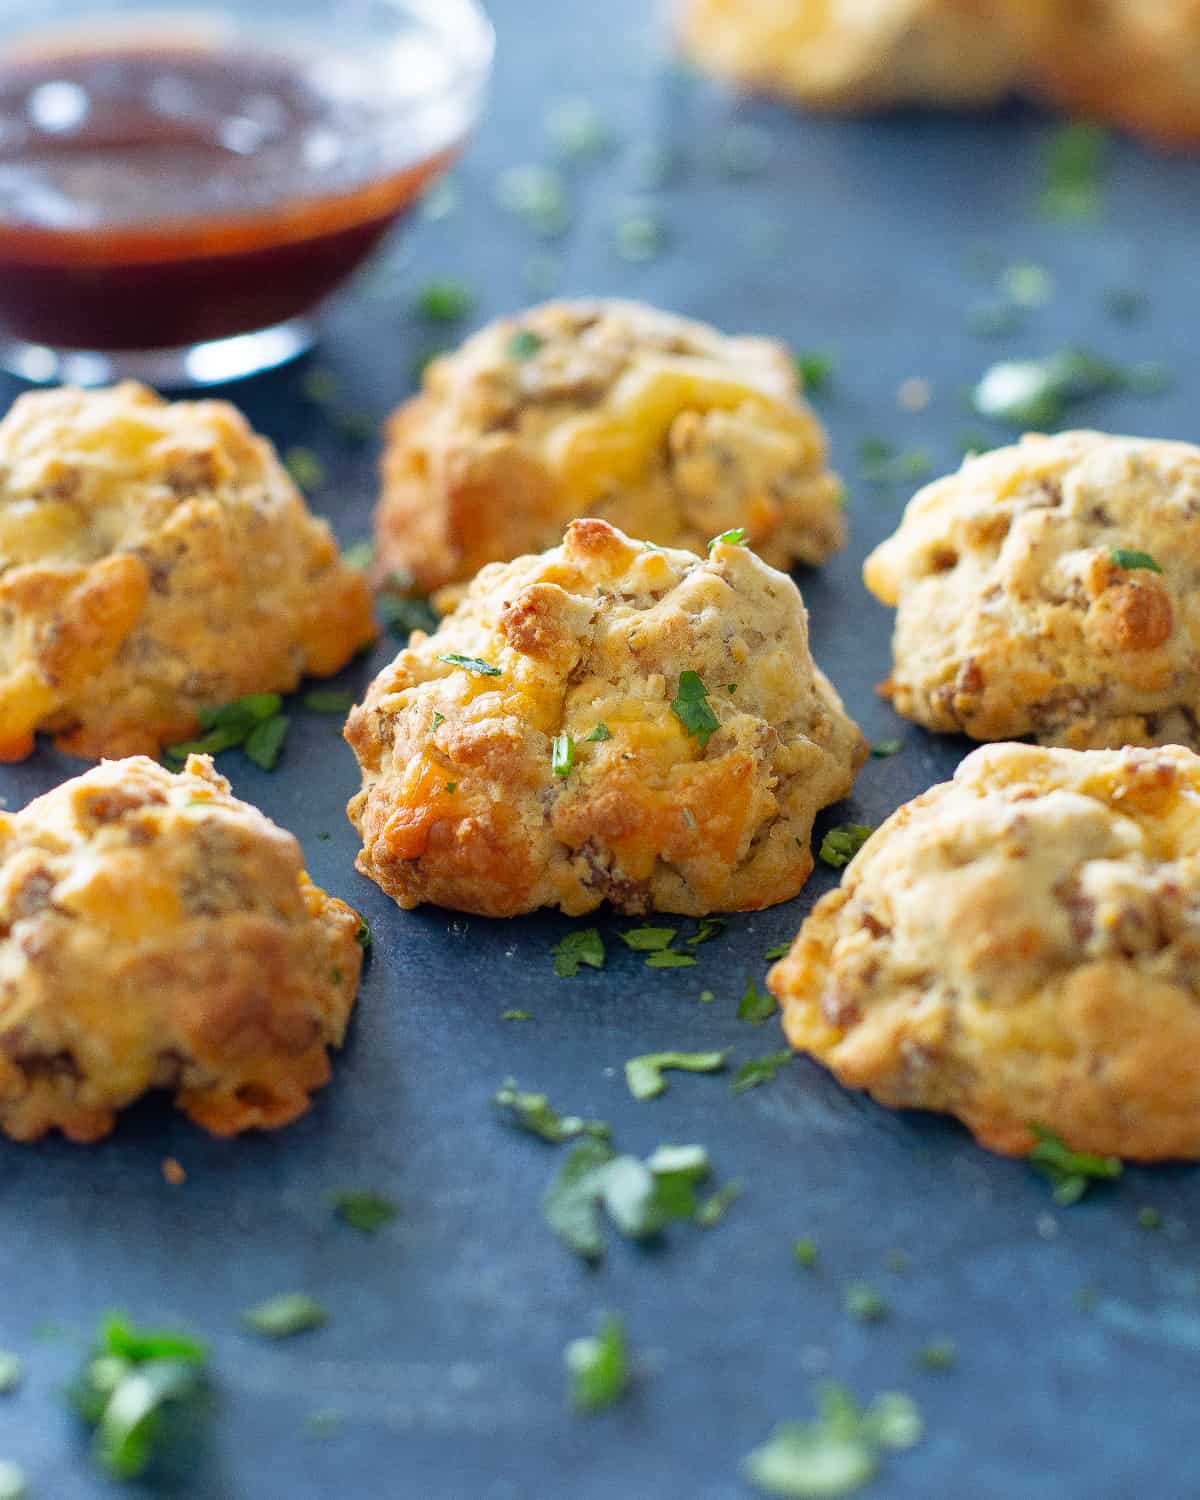 https://www.the-girl-who-ate-everything.com/wp-content/uploads/2011/02/sausage-cheese-balls-10.jpg